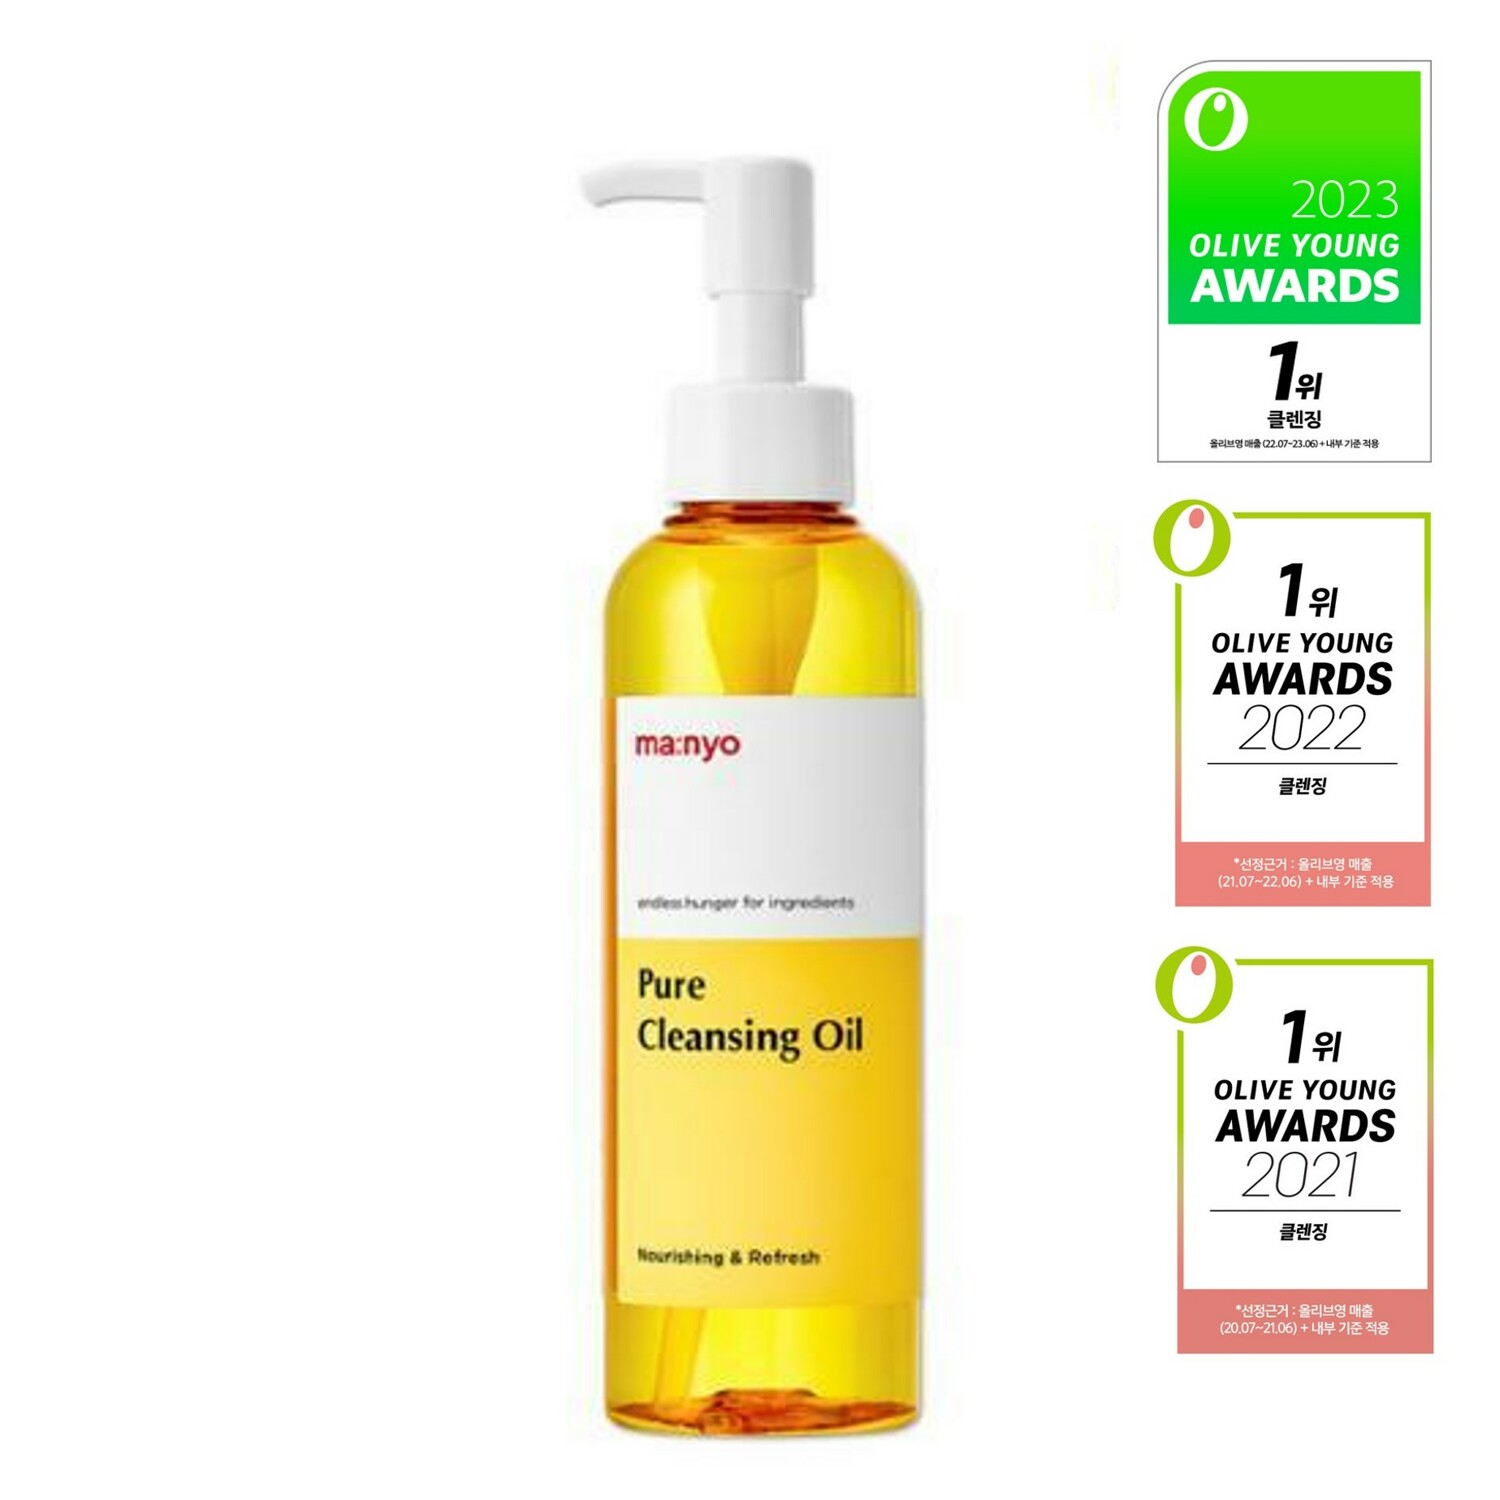 ma_nyo Pure Cleansing Oil